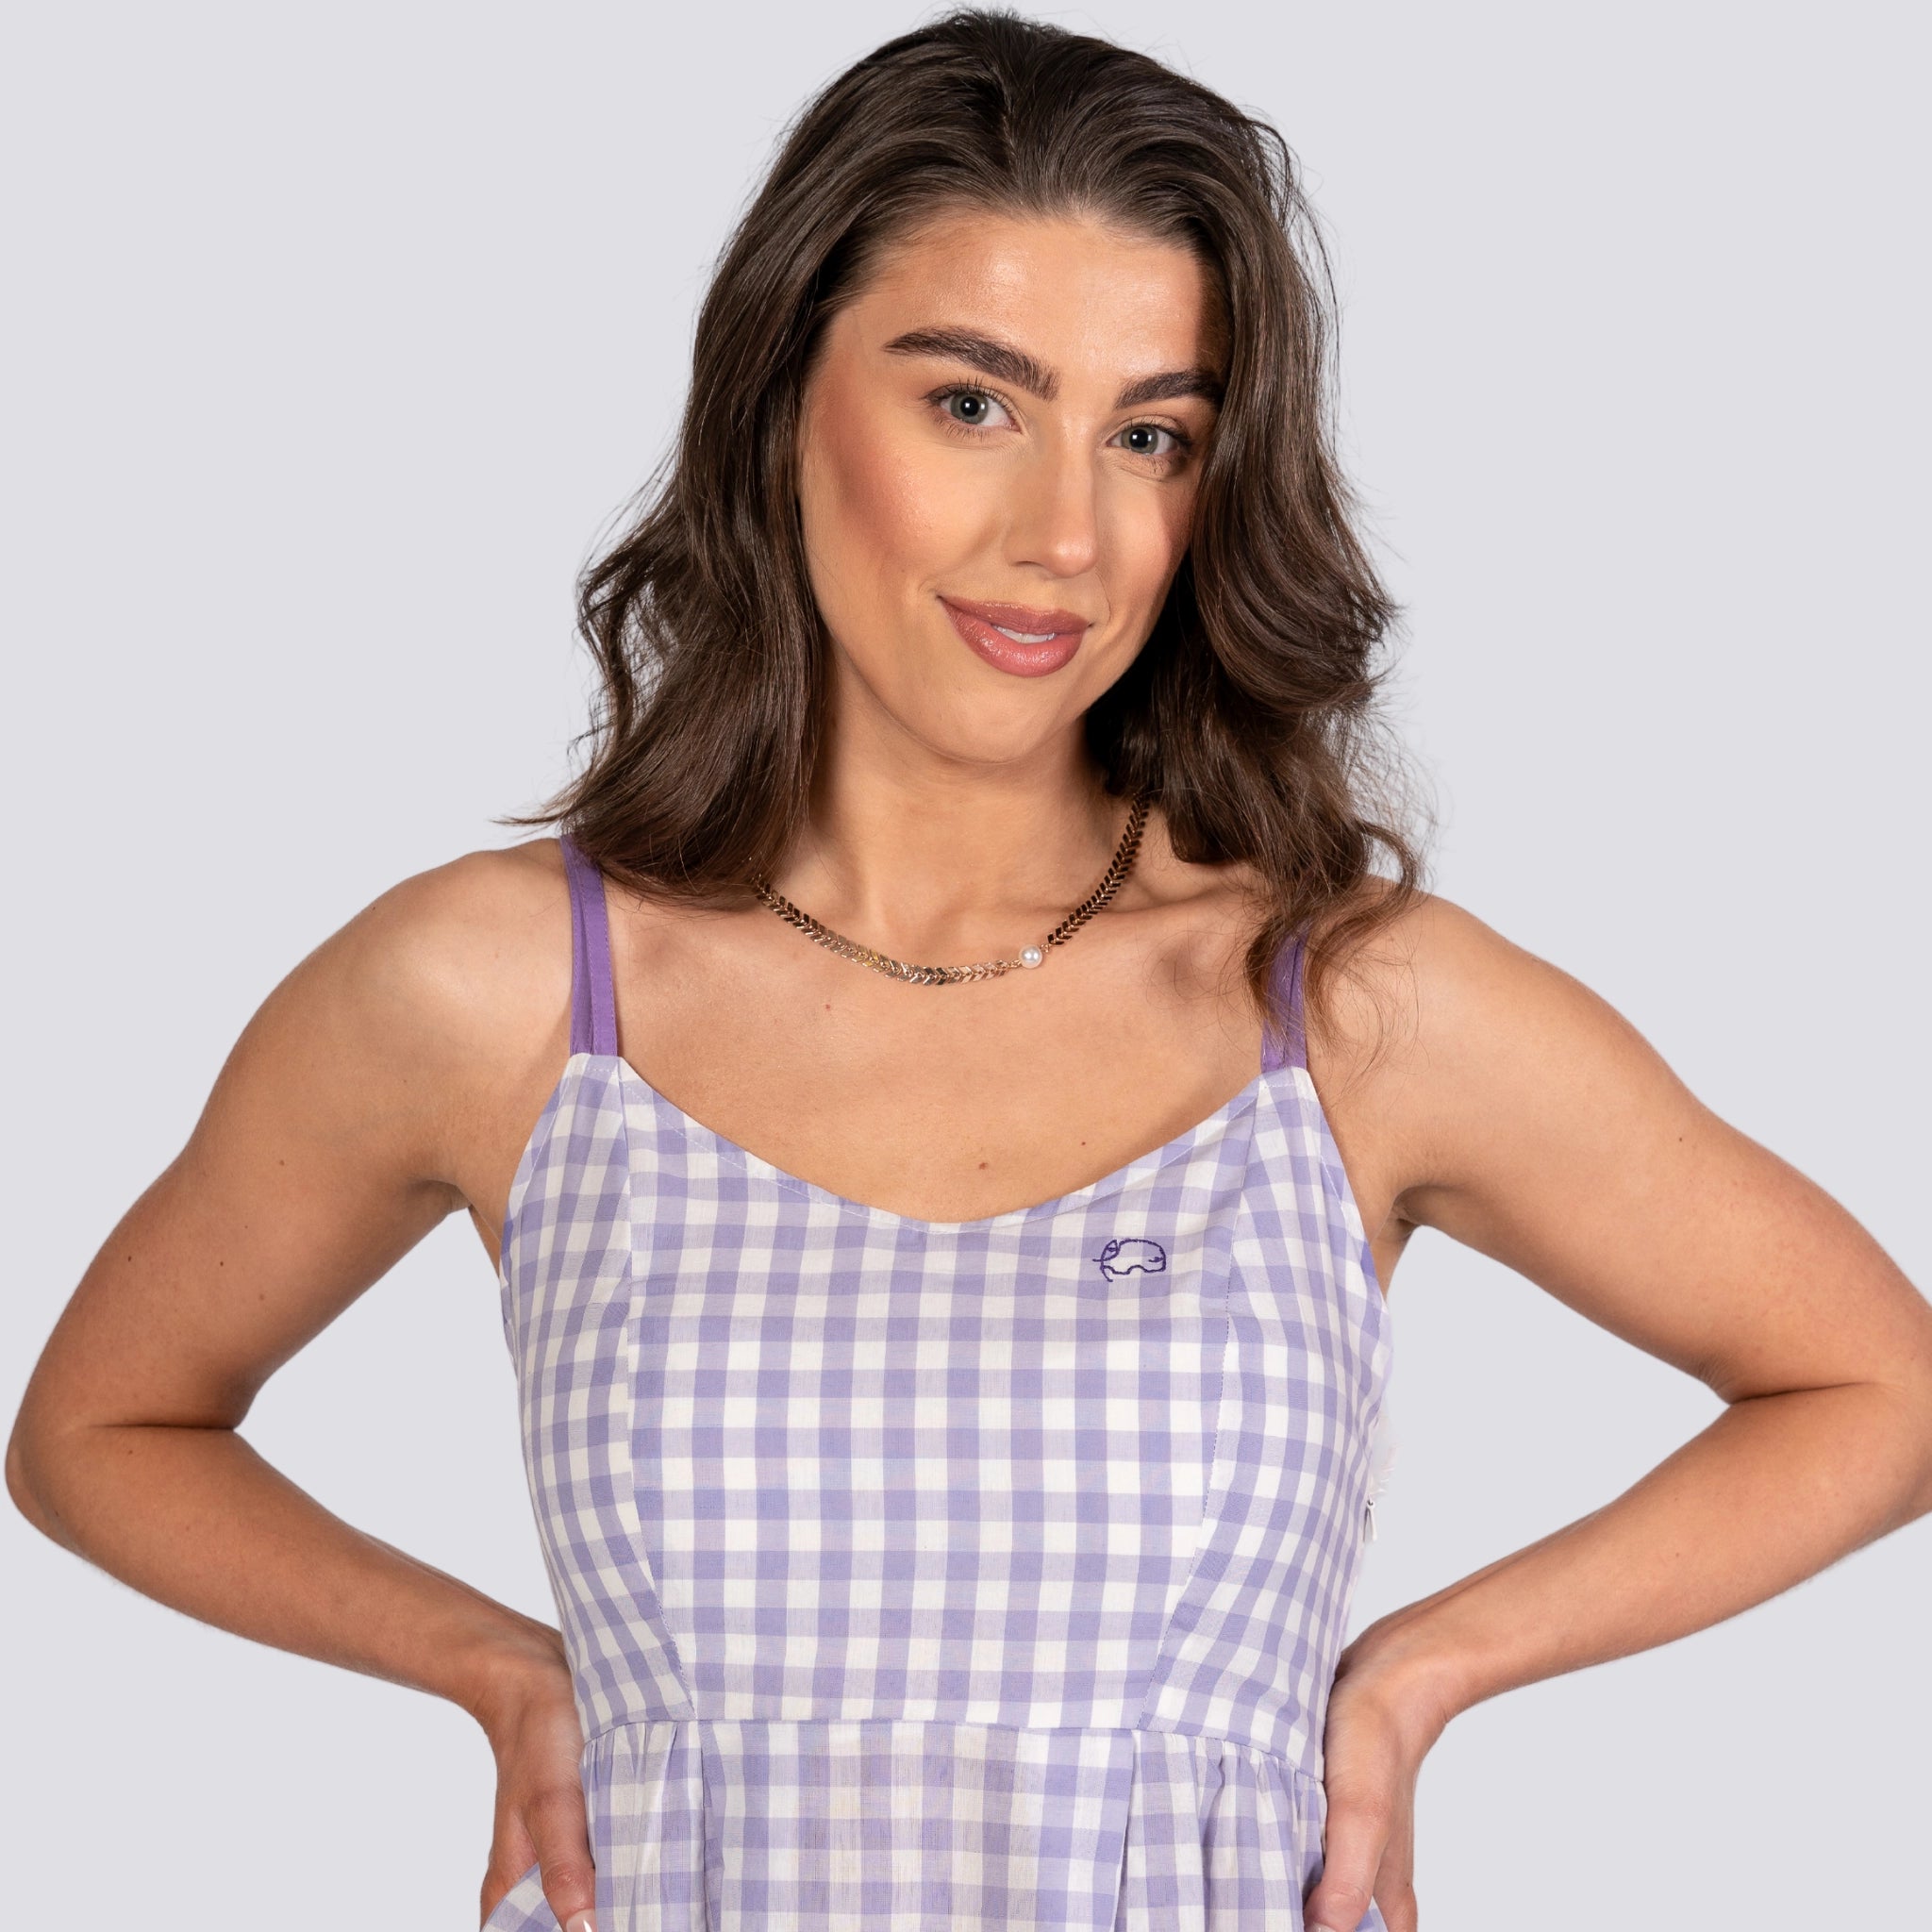 A woman in a Karee Lavender Plaid Cotton Mini Dress smiling at the camera with her hands on her hips, against a gray background.